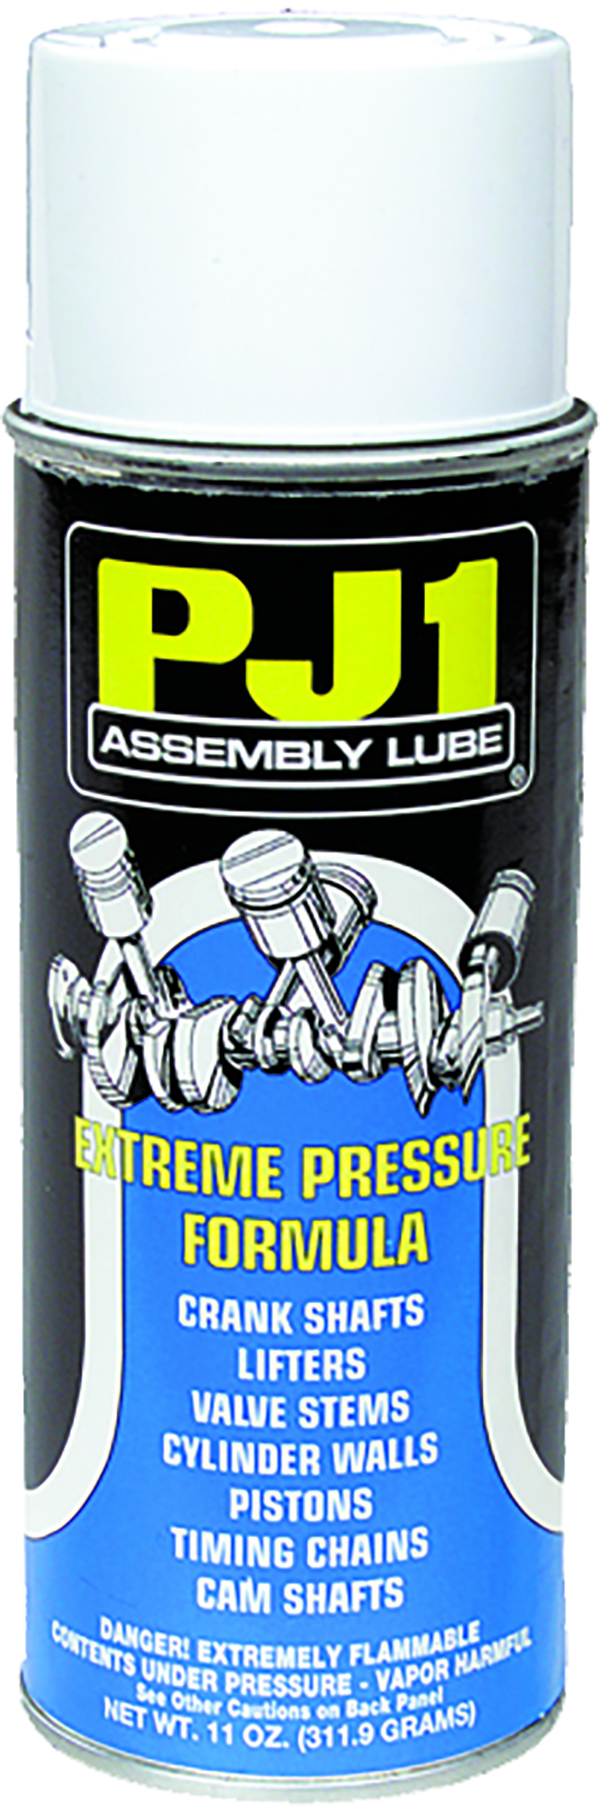 Assembly Lube Image